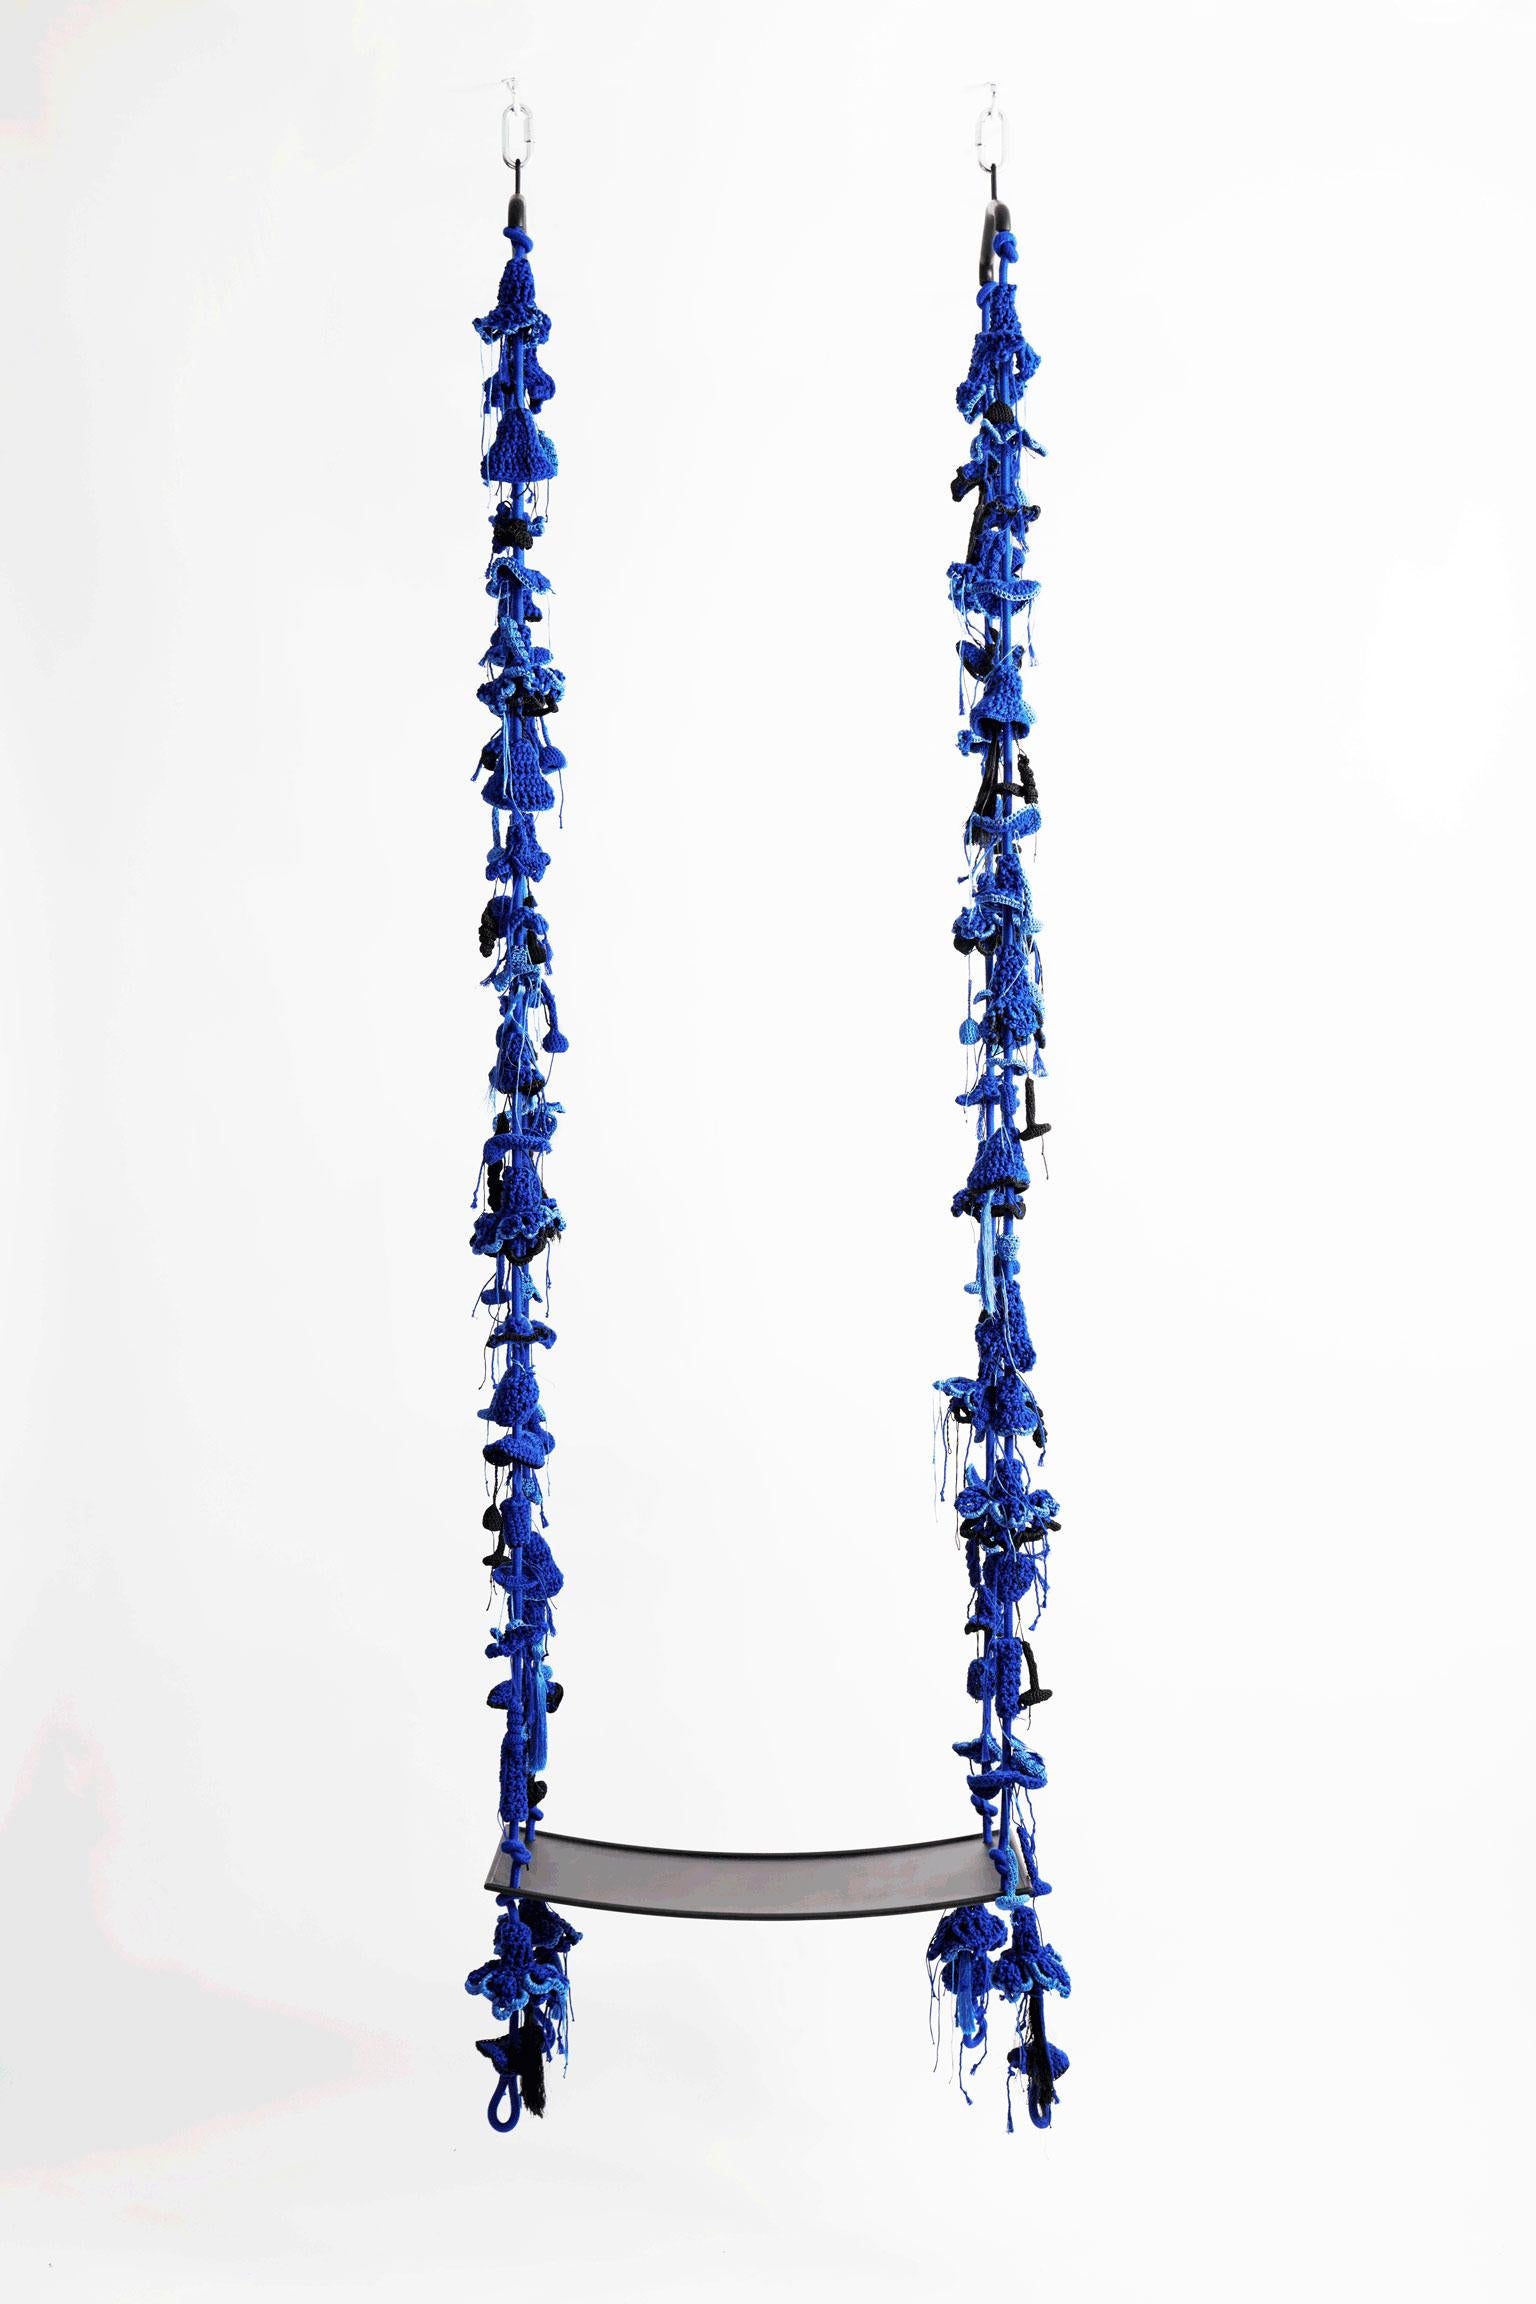 The royal blue iota swing, inspired by climbing plants, takes the user to a wild, natural, fantastic place. The swing showcases much of our special knitted hand work. The numerous intricate elements that form the swing are hand knit with bespoke